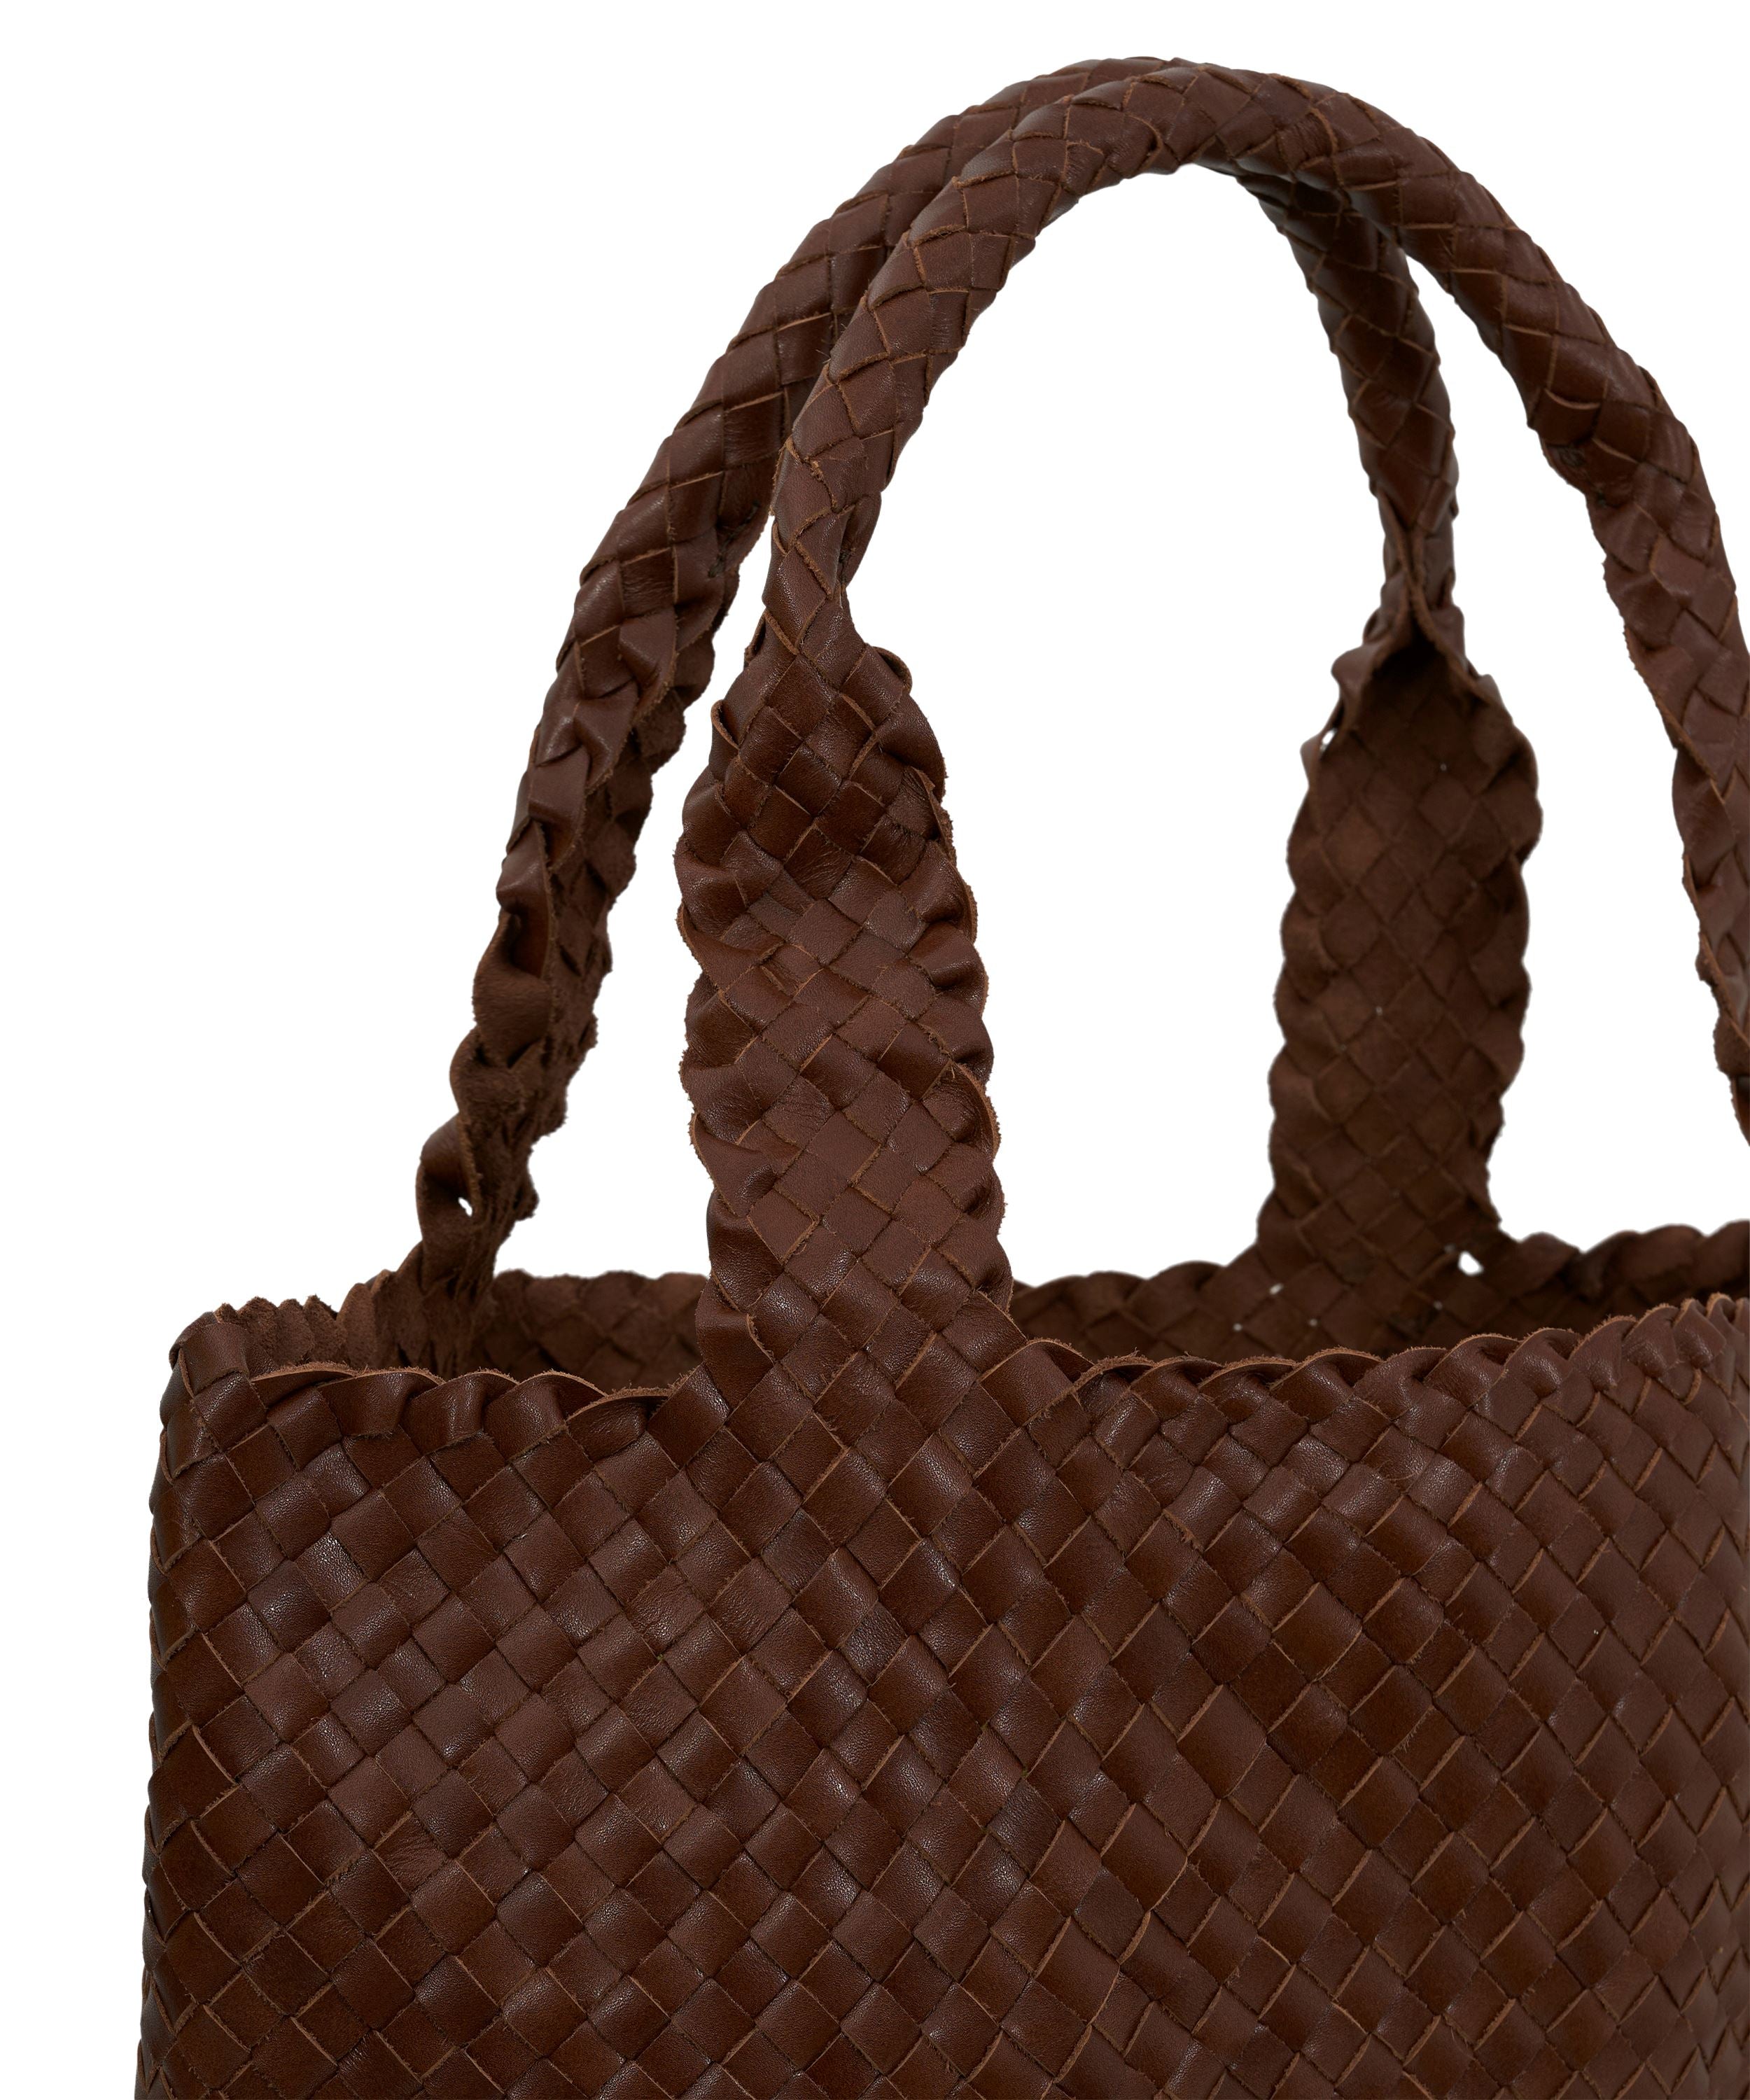 Joie Woven Tote in Chocolate Brown